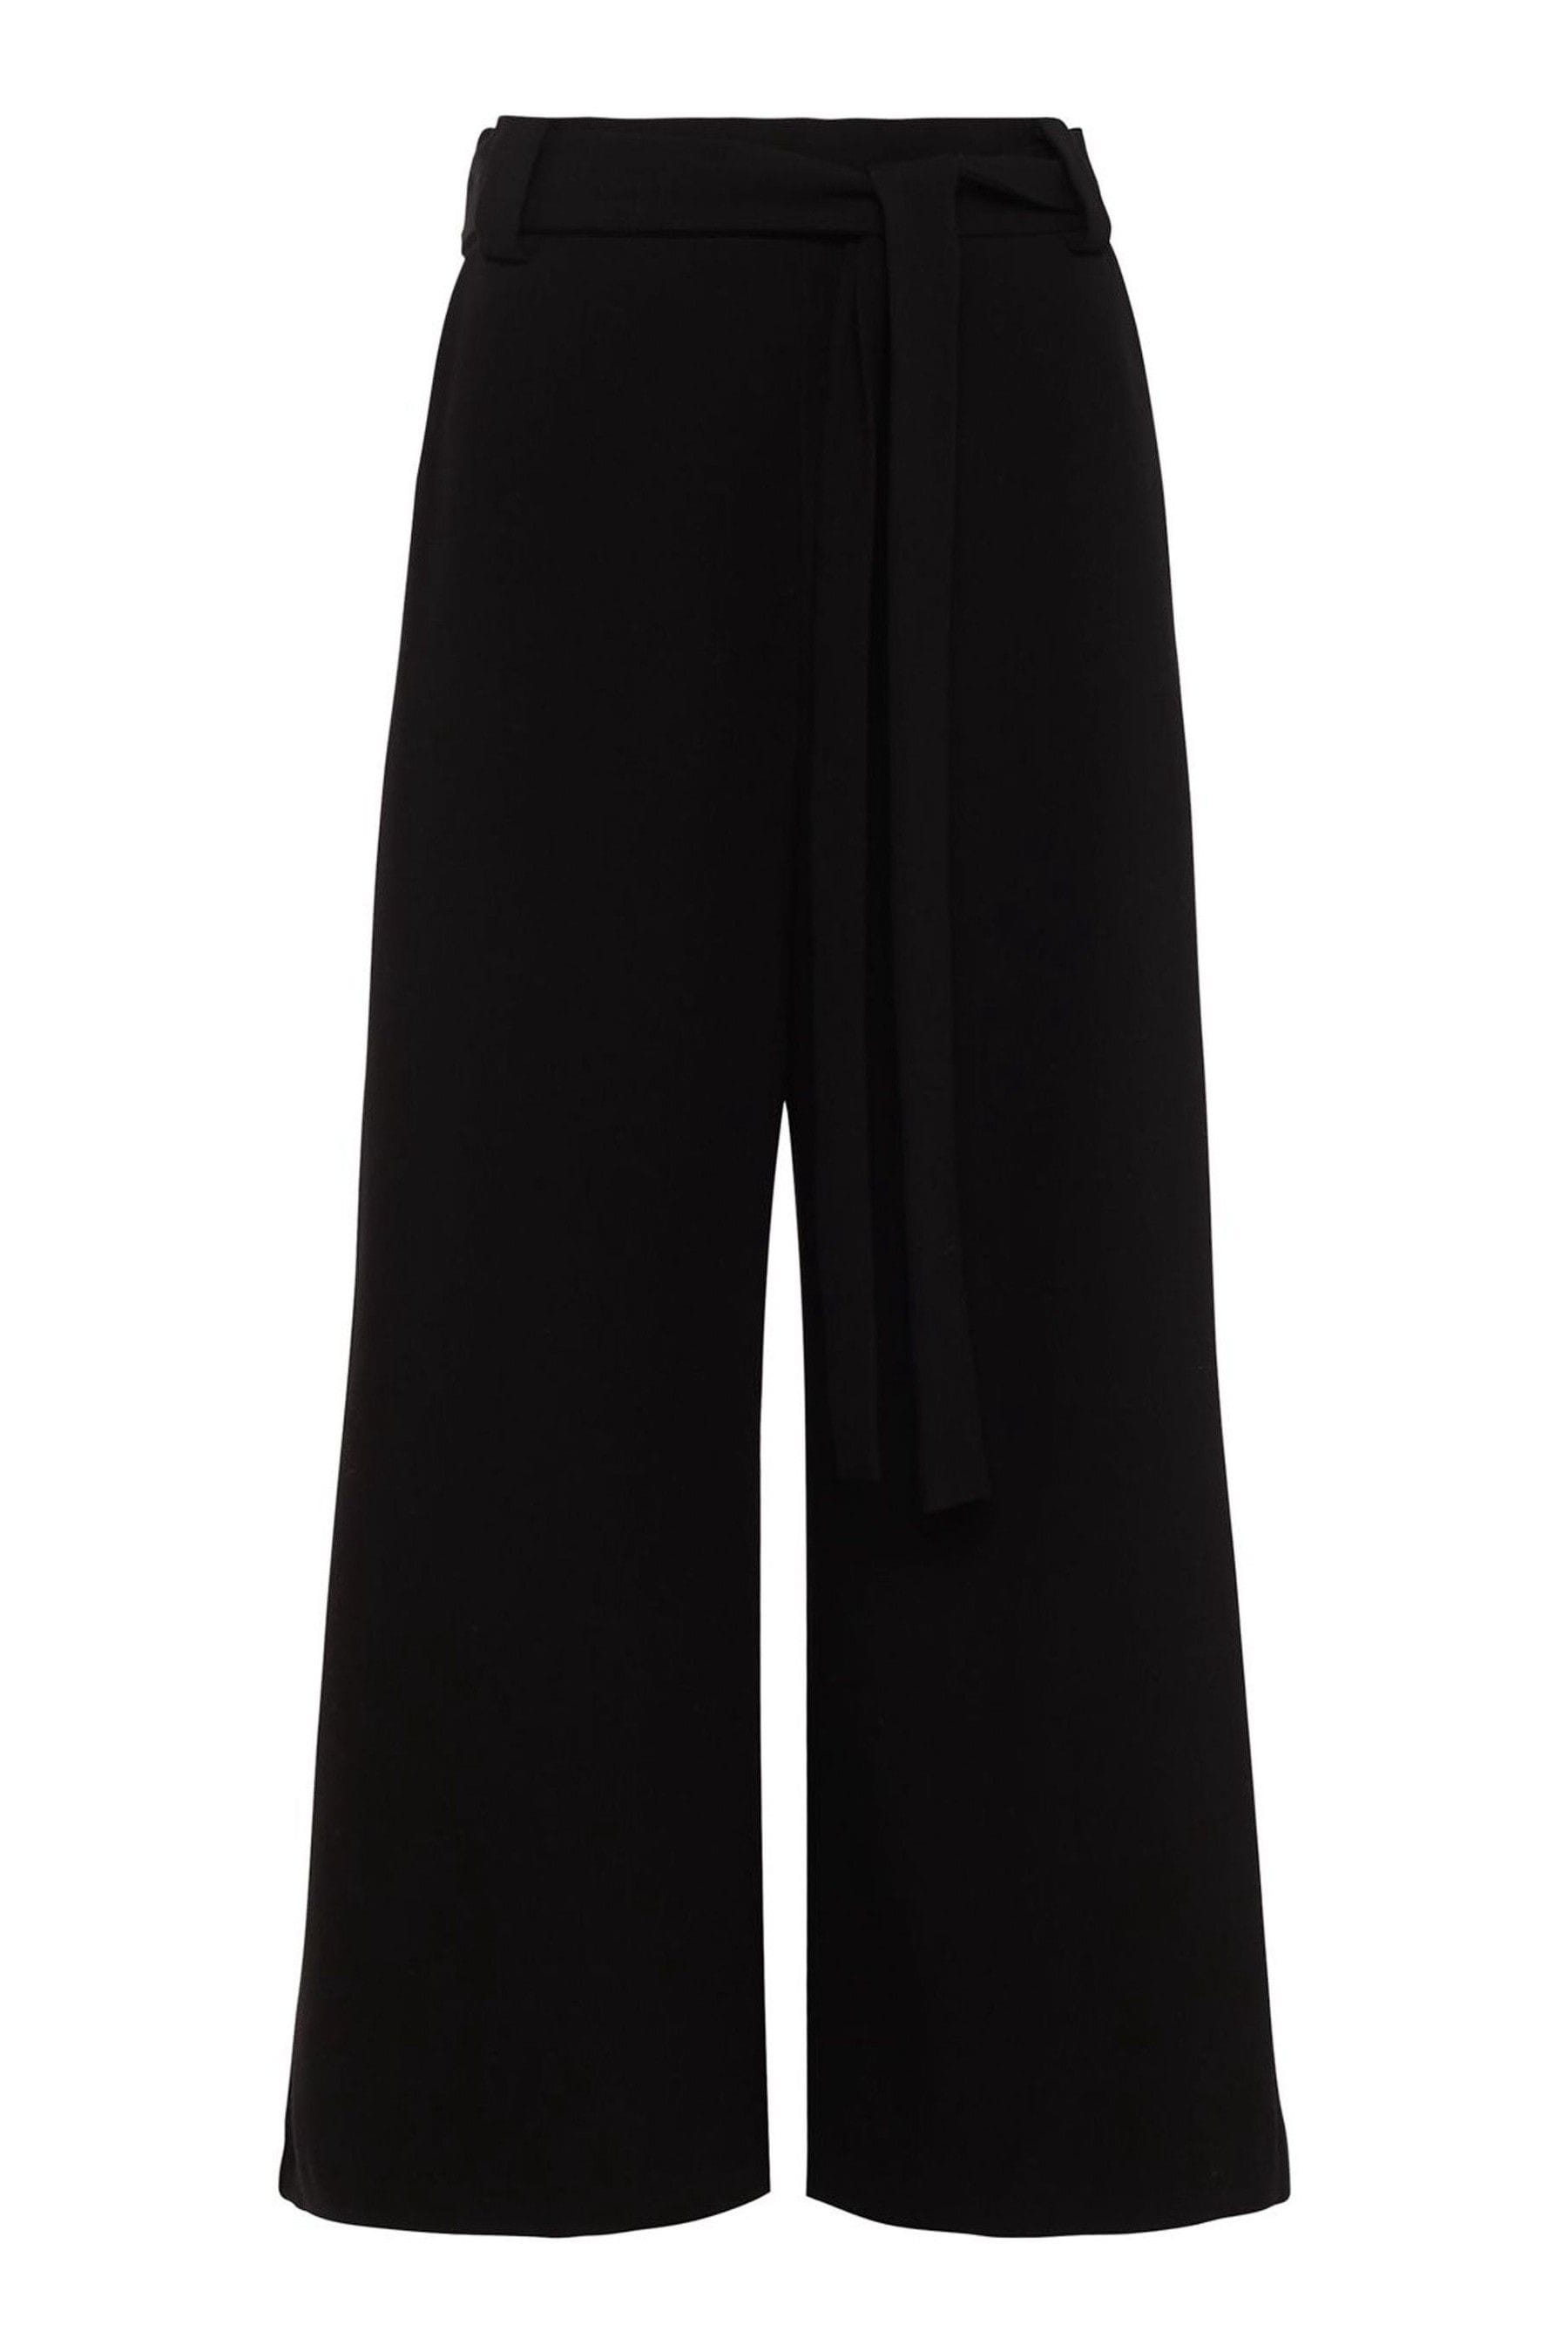 Buy French Connection Black Whisper Belted Culottes from the Next UK ...